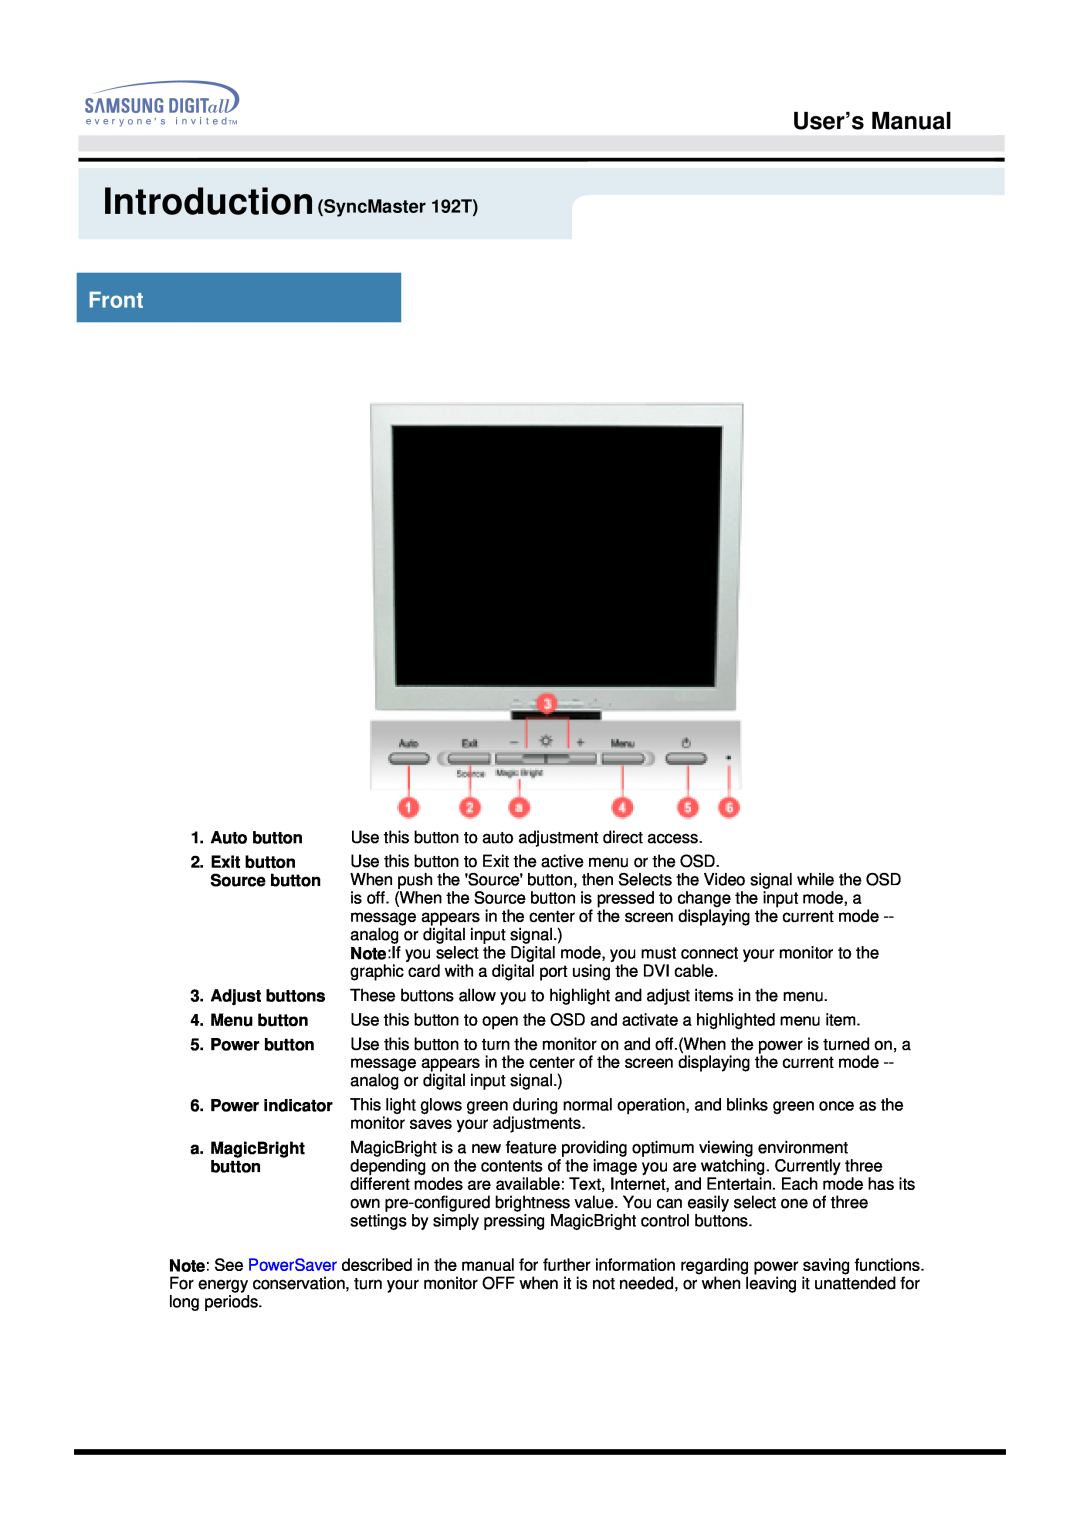 Samsung 192B manual User’s Manual, Front, IntroductionSyncMaster 192T 